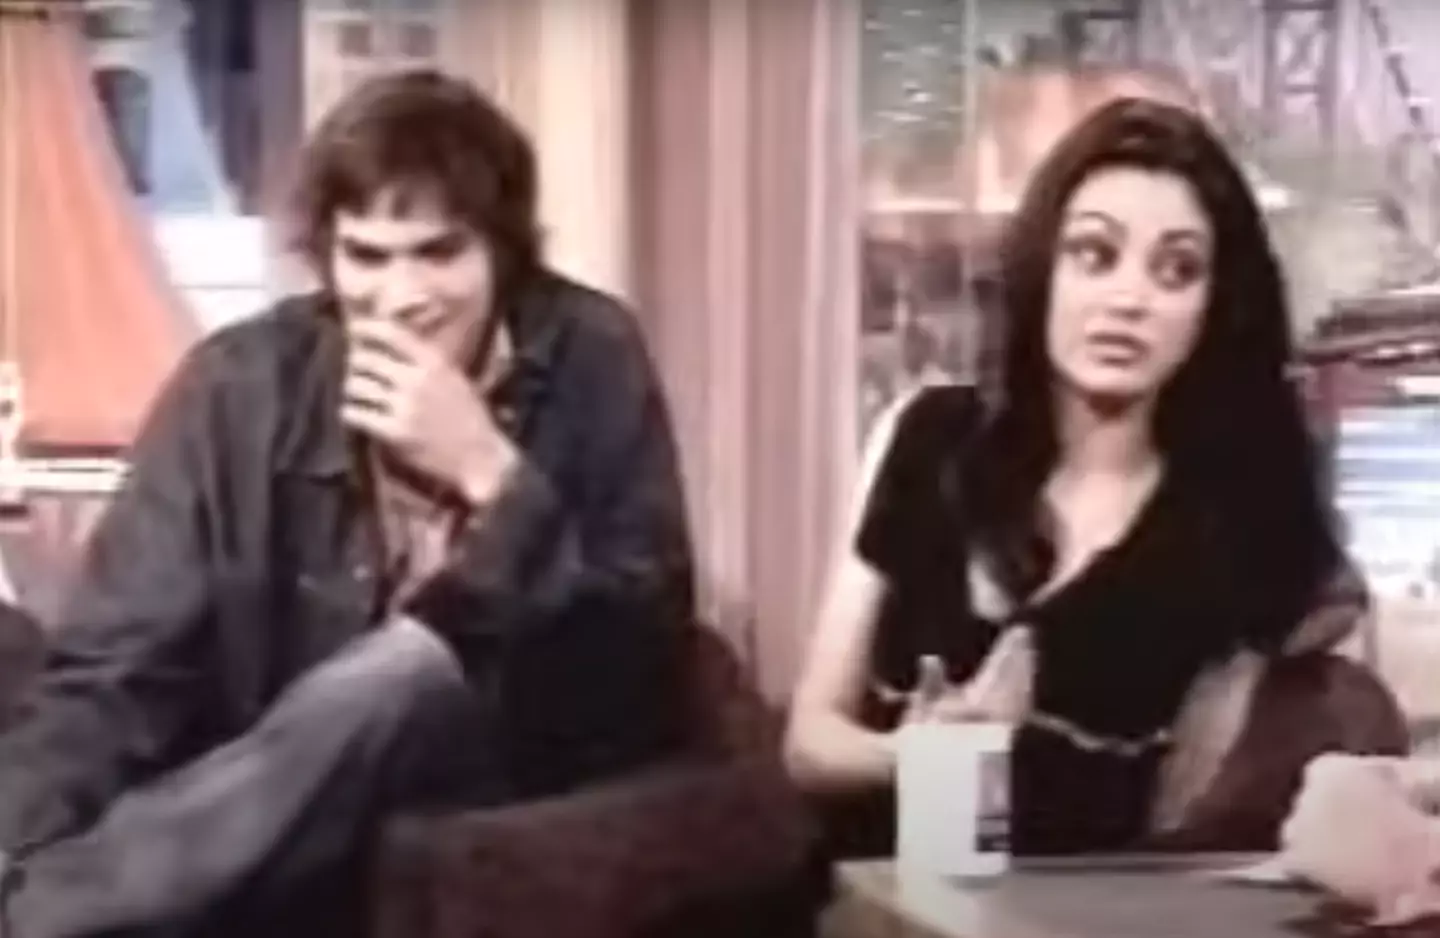 Mila Kunis' comments on a resurfaced interview have gone viral.